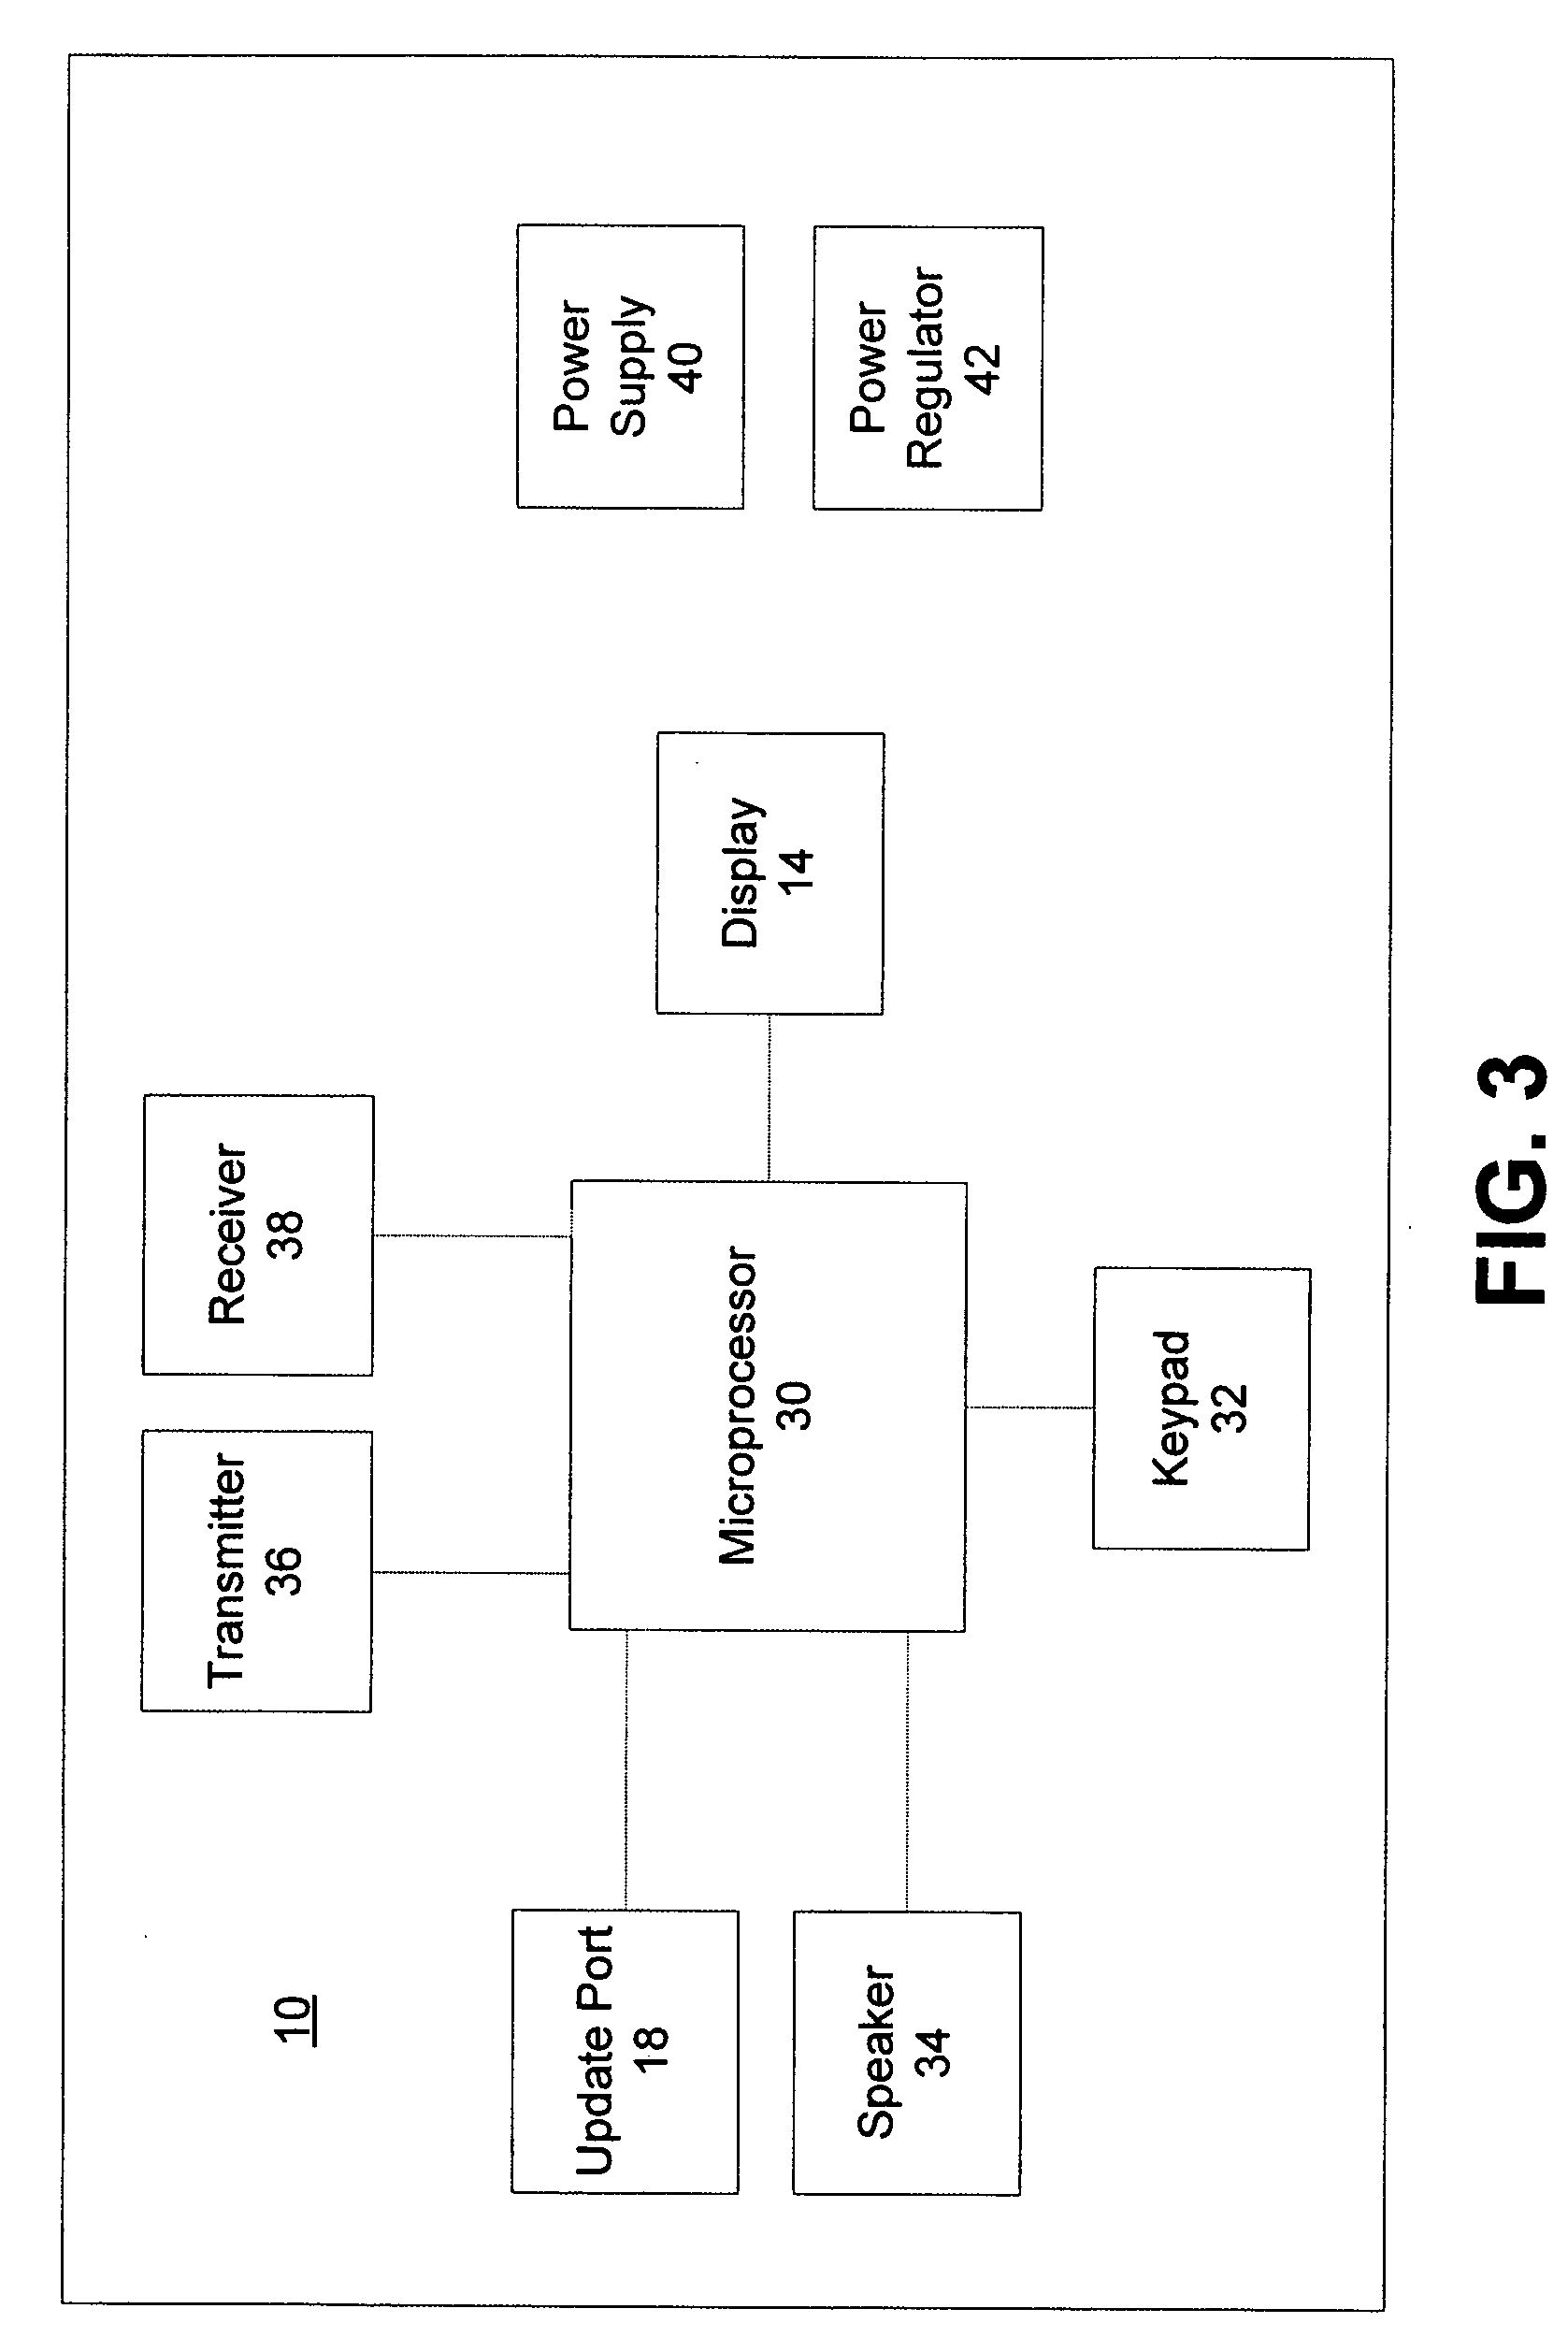 Tire pressure monitor system tool with vehicle entry system